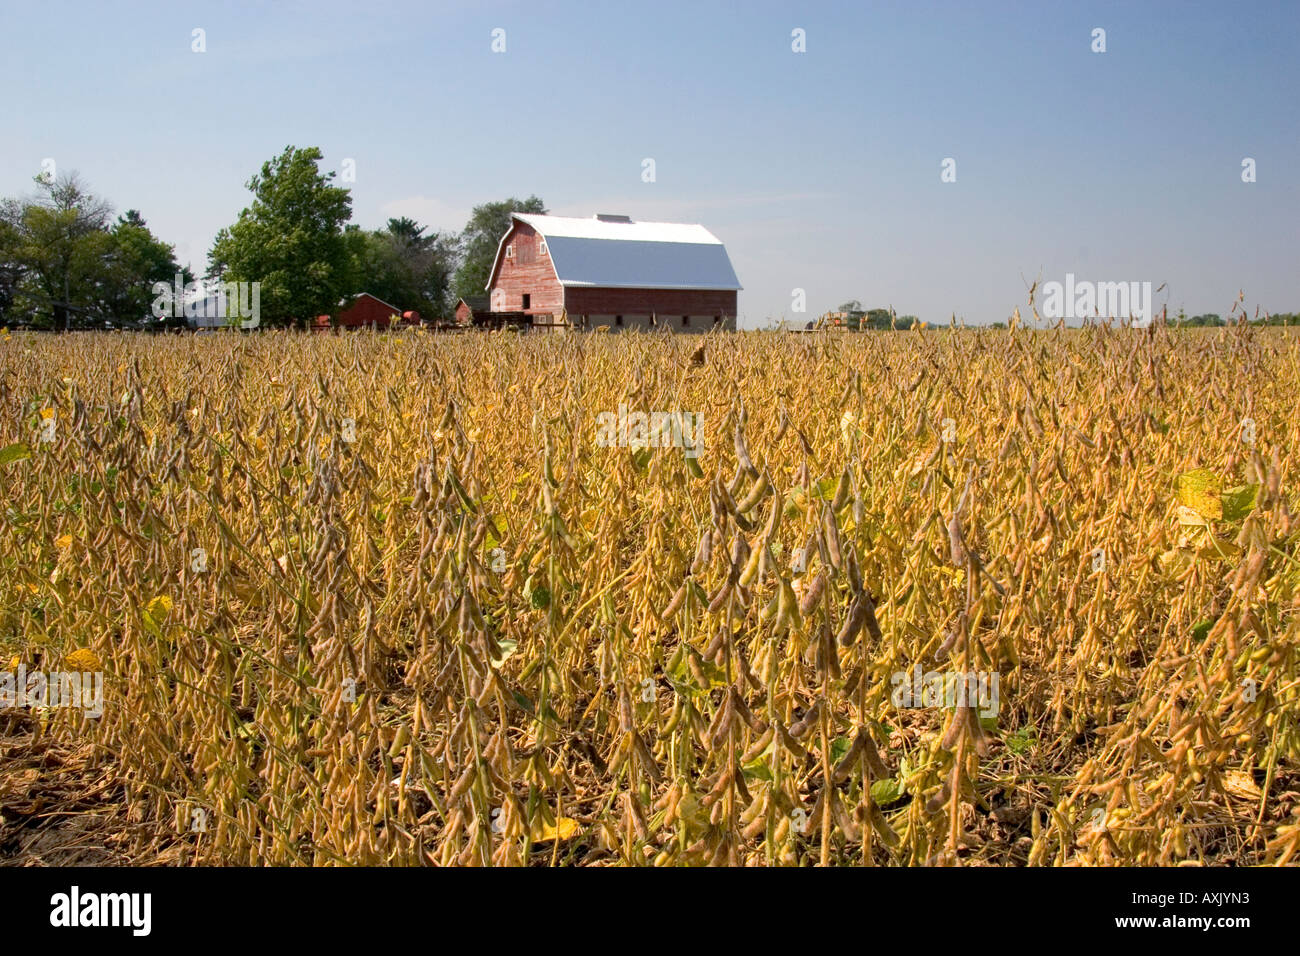 Red barn and soy bean crop at Ladd Illinois Stock Photo